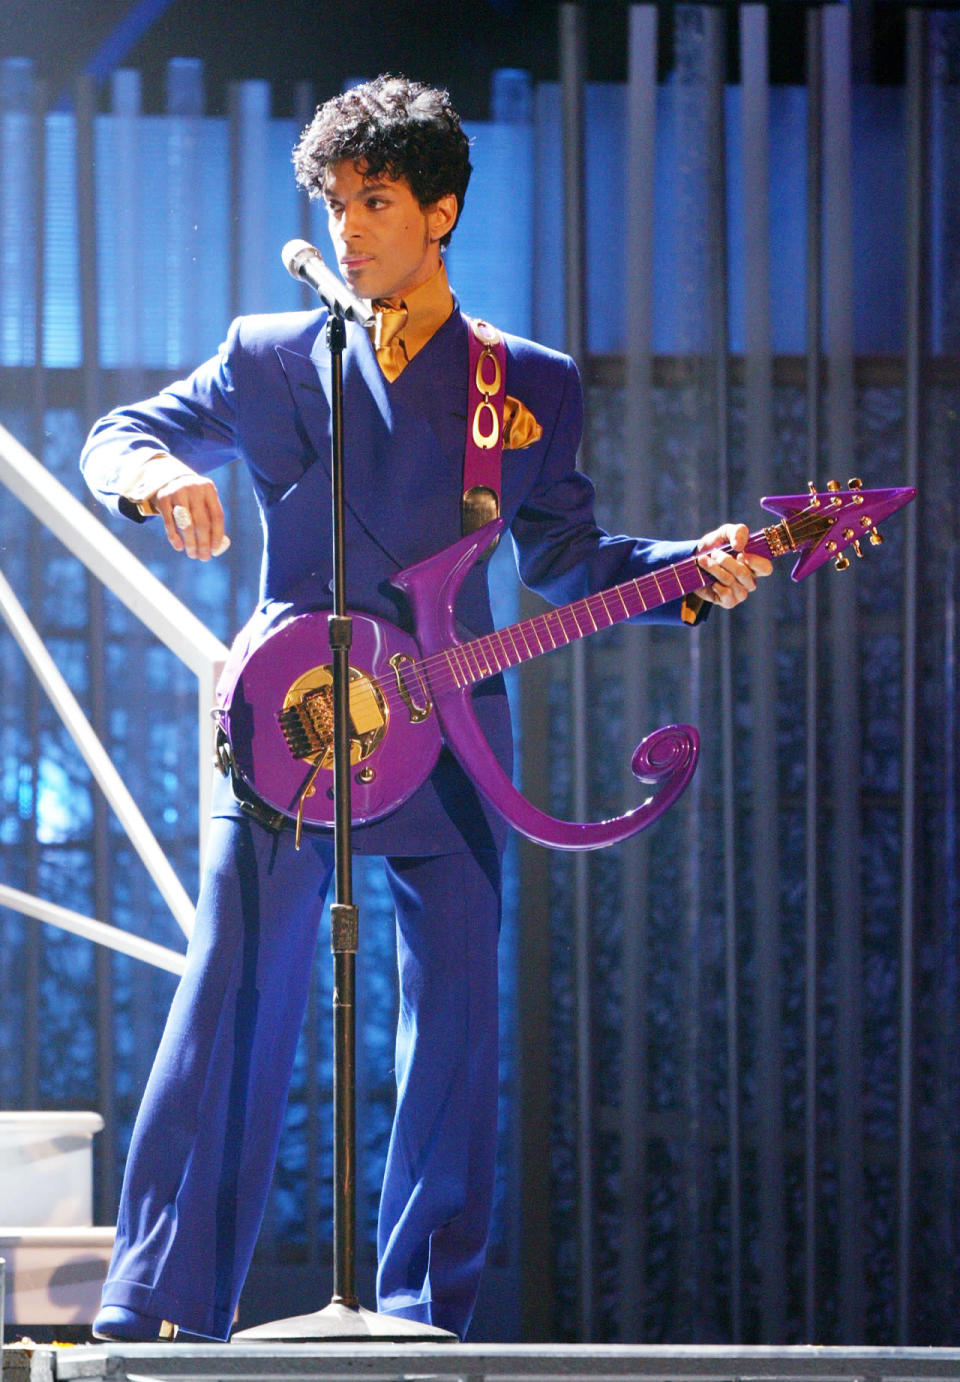 Prince performs at the 46th Annual Grammy Awards in 2004